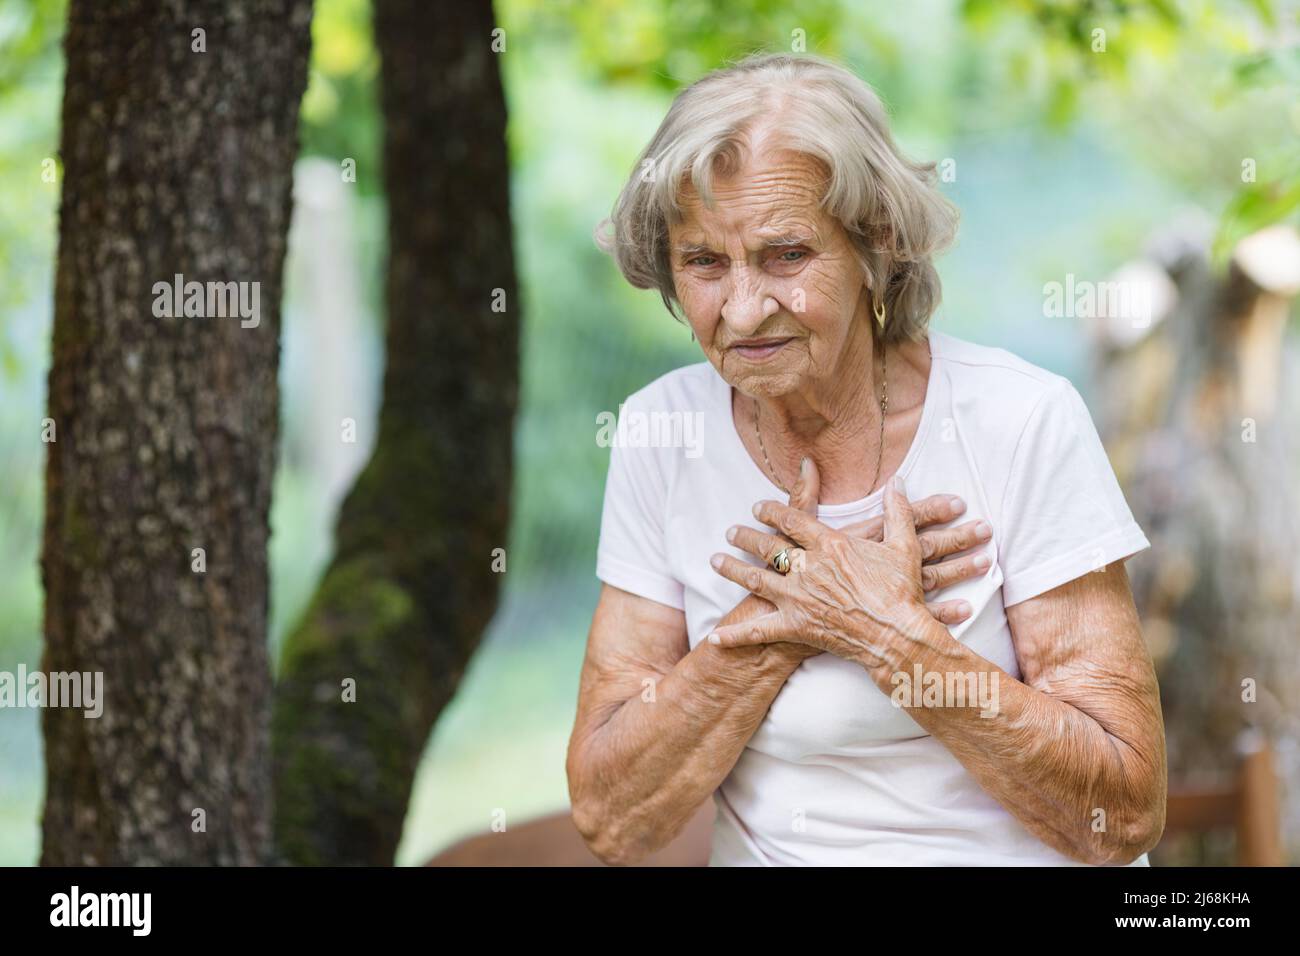 Elderly woman outdoors with heart pain holding her chest Stock Photo